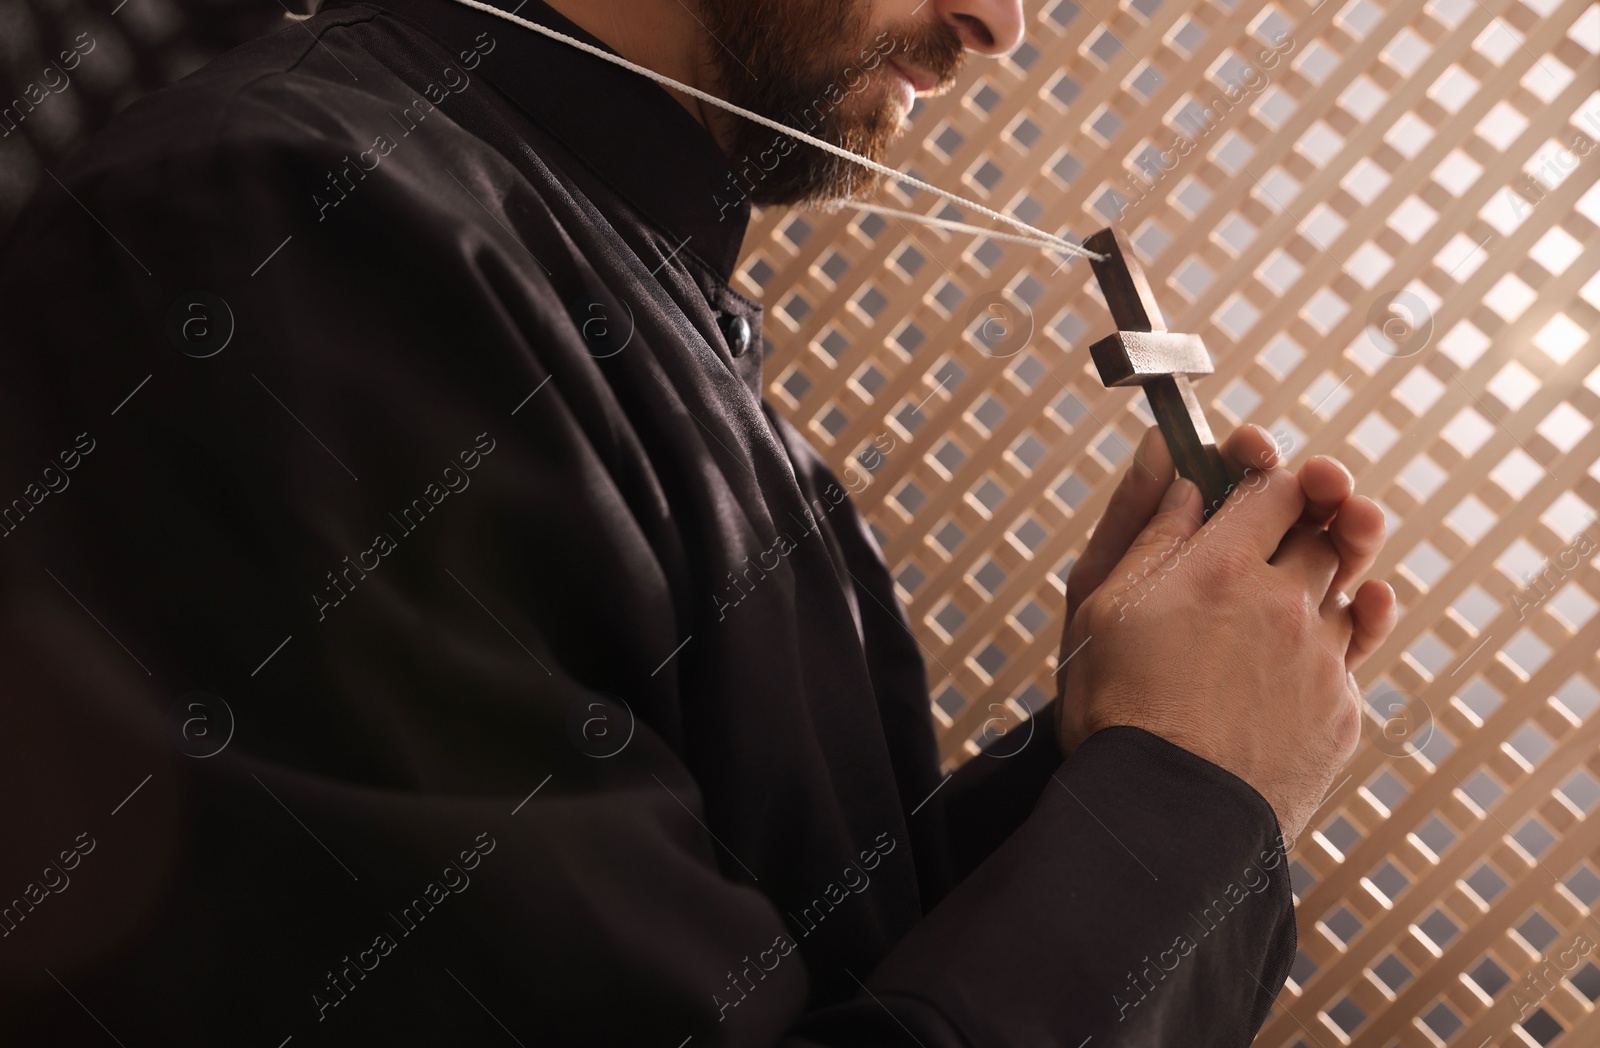 Photo of Catholic priest in cassock holding cross in confessional booth, closeup